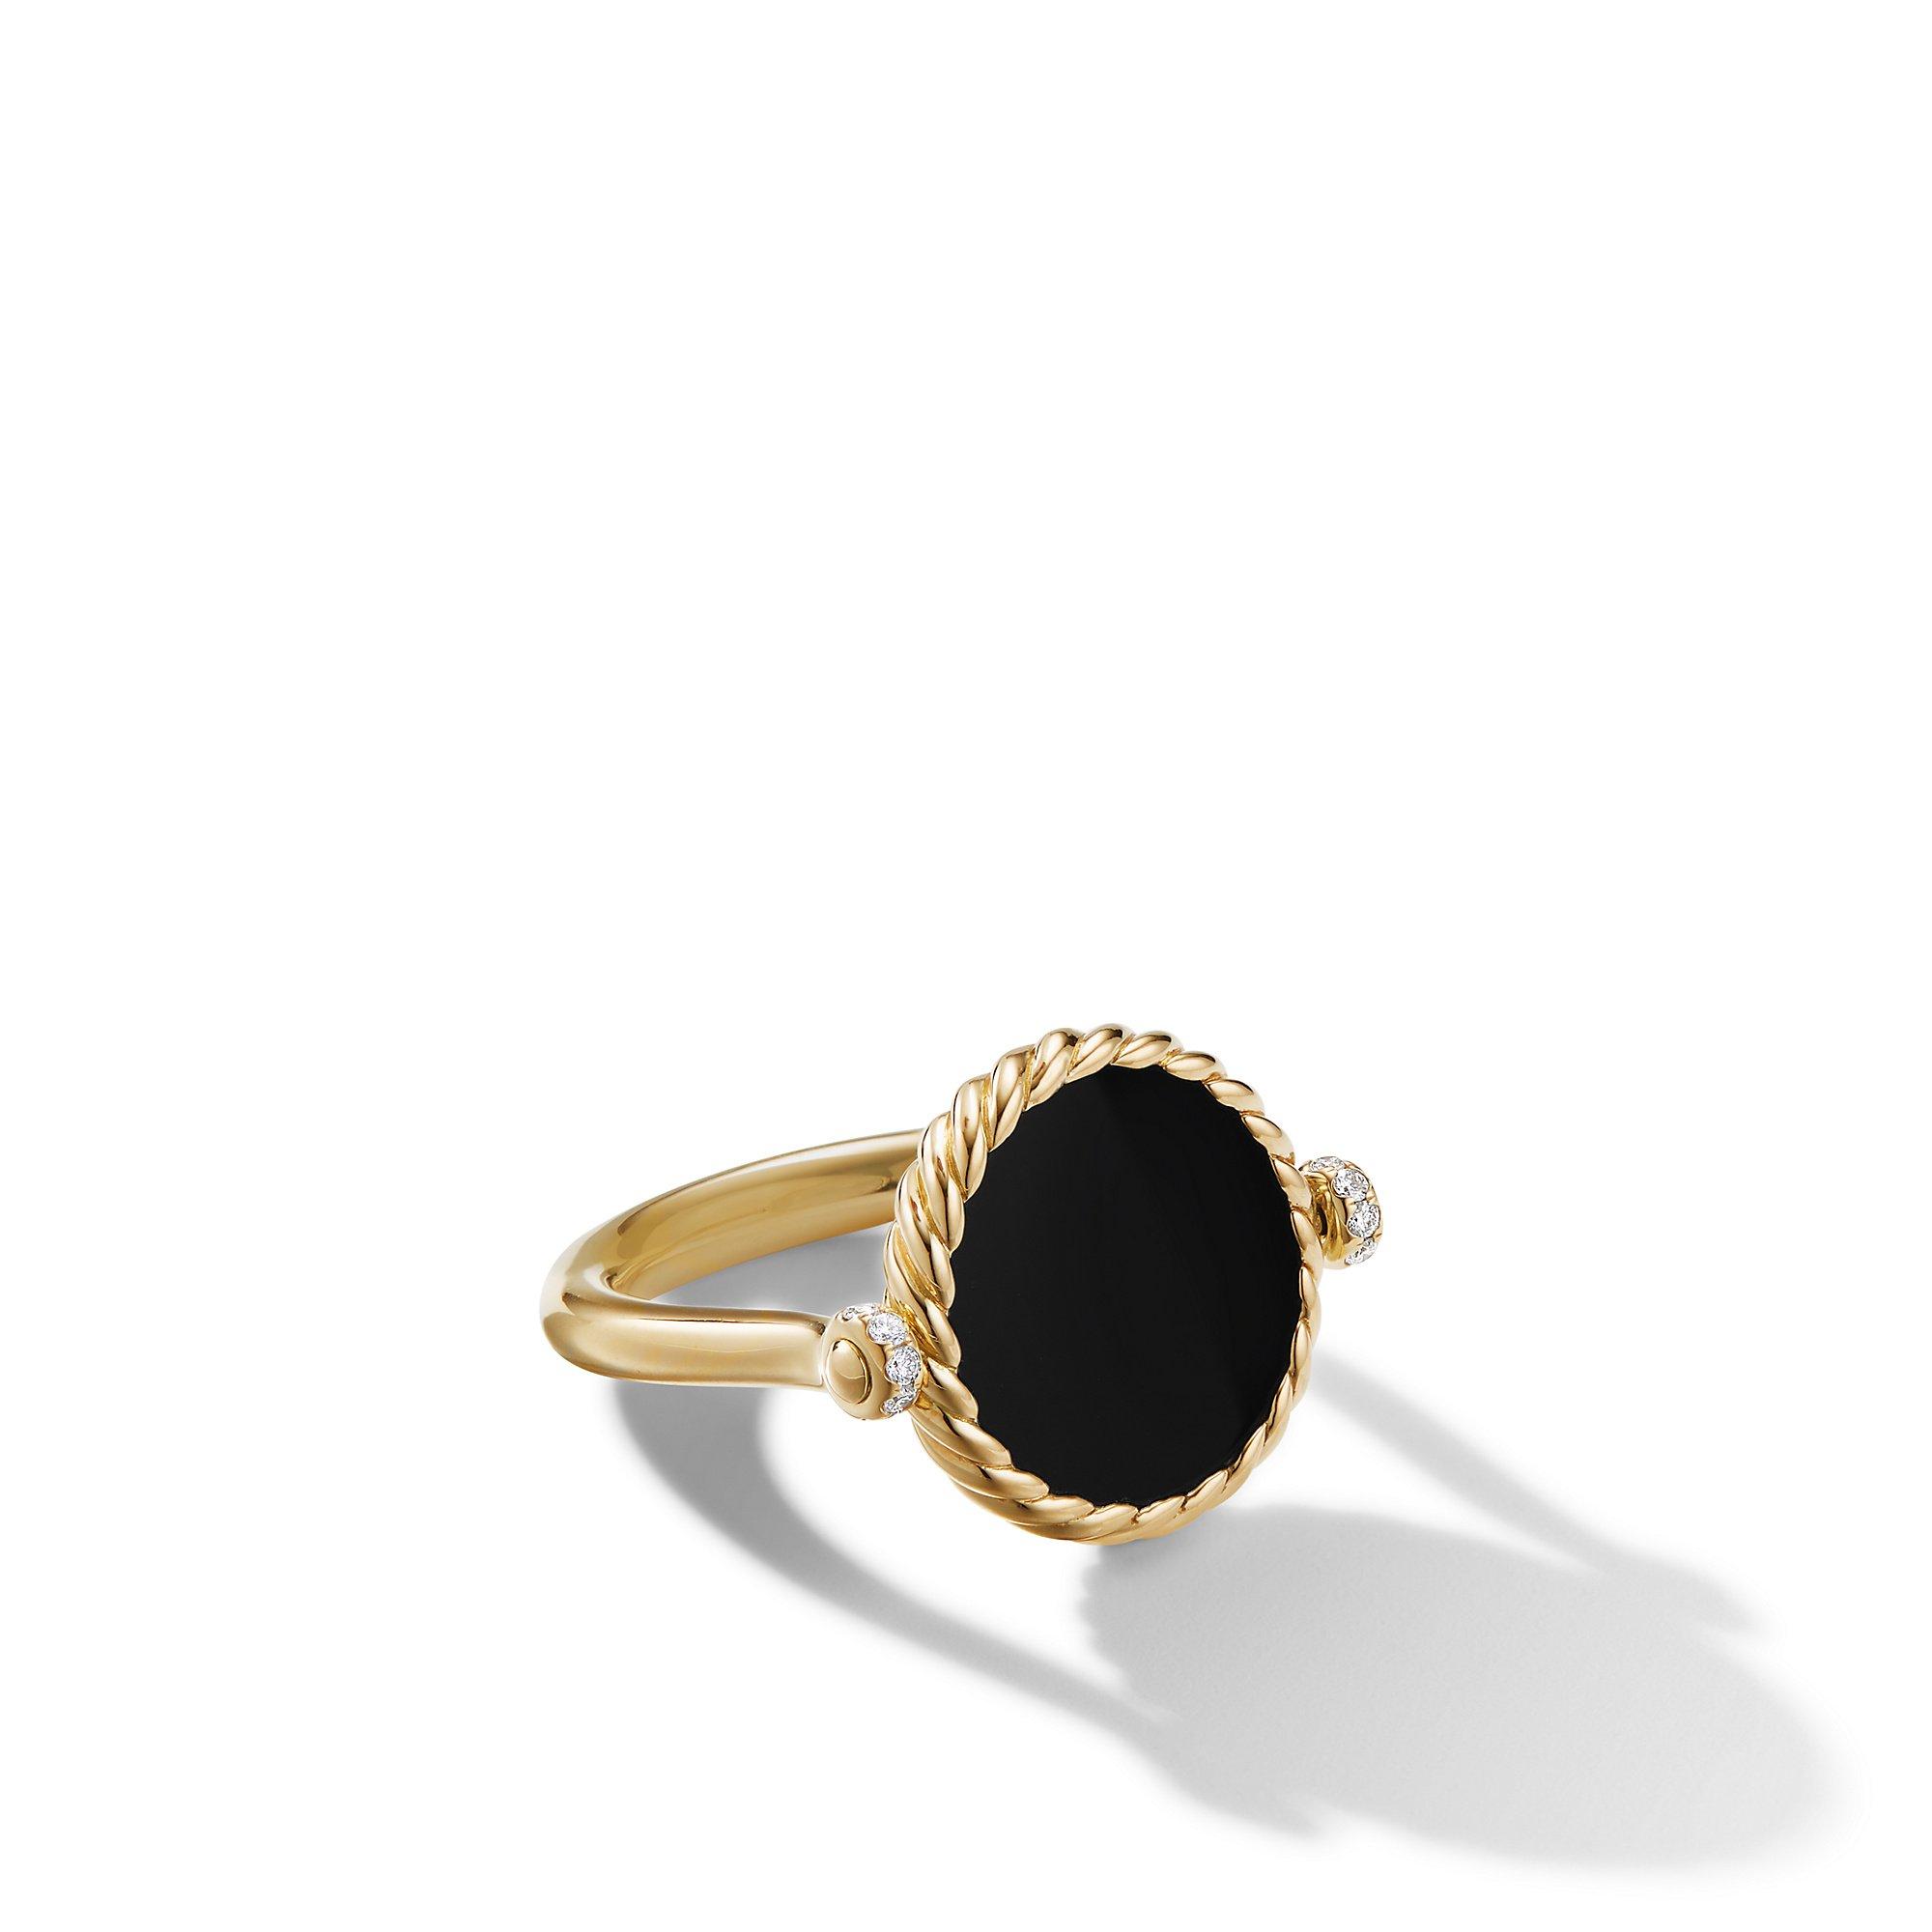 David Yurman Elements Swivel Ring in 18K Yellow Gold with Black Onyx and Mother Of Pearl and Pave Diamonds, size 7